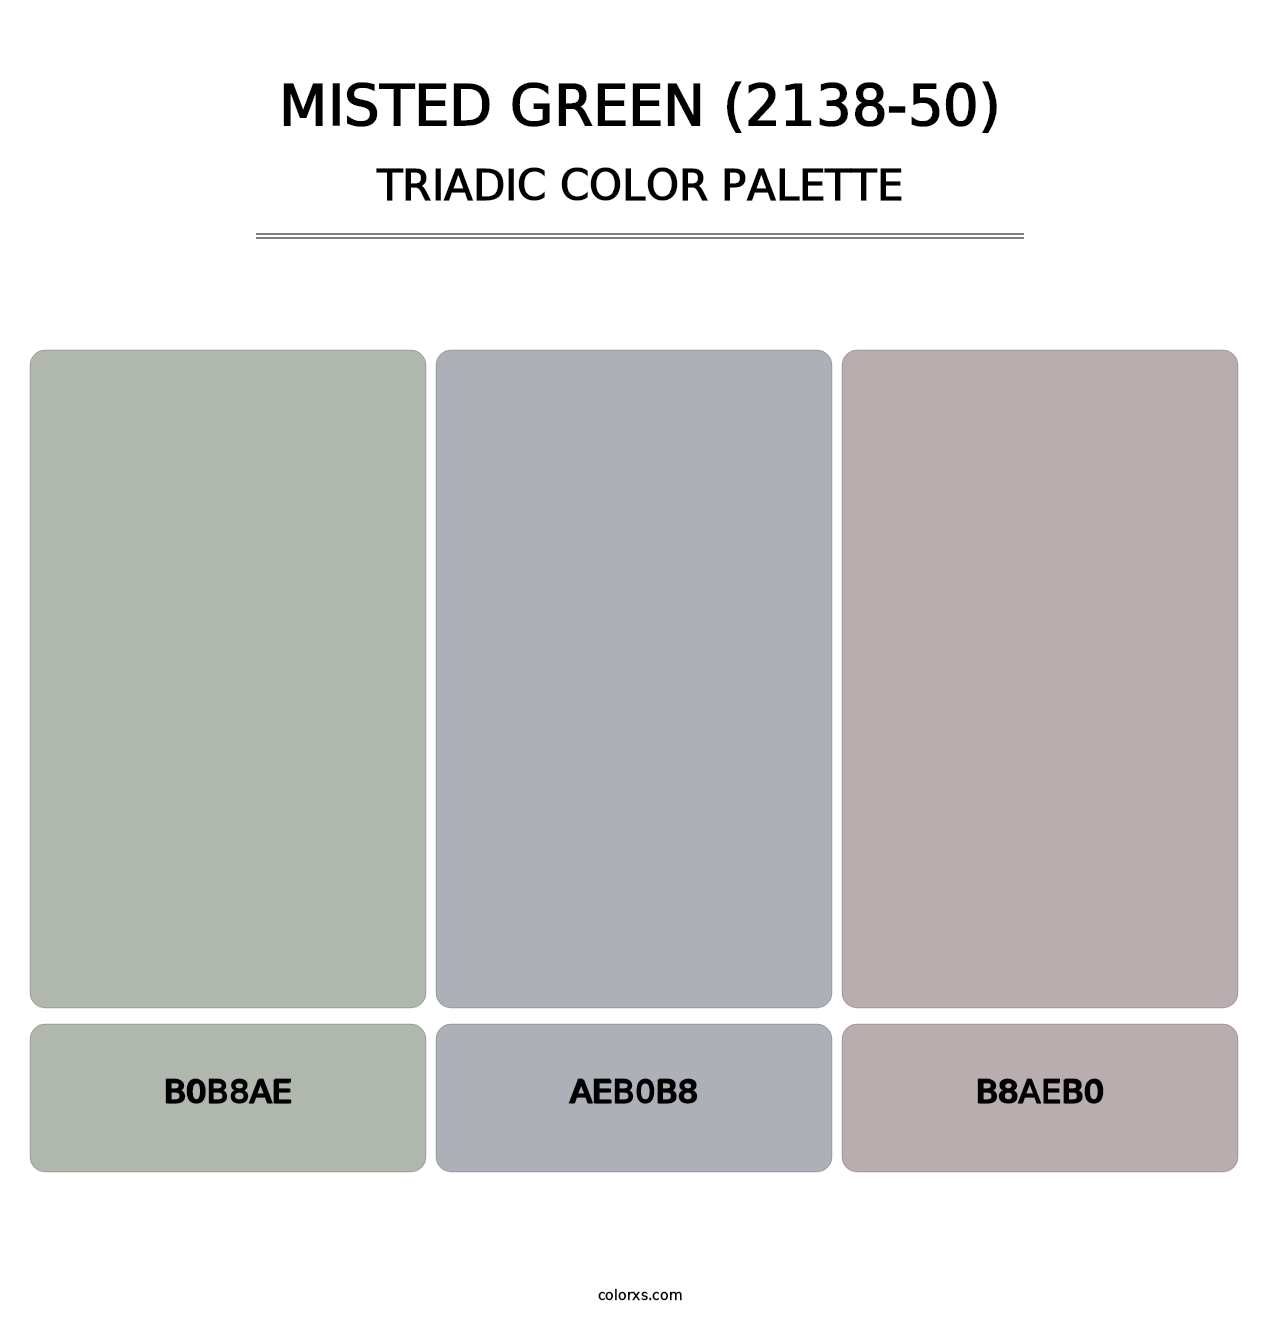 Misted Green (2138-50) - Triadic Color Palette